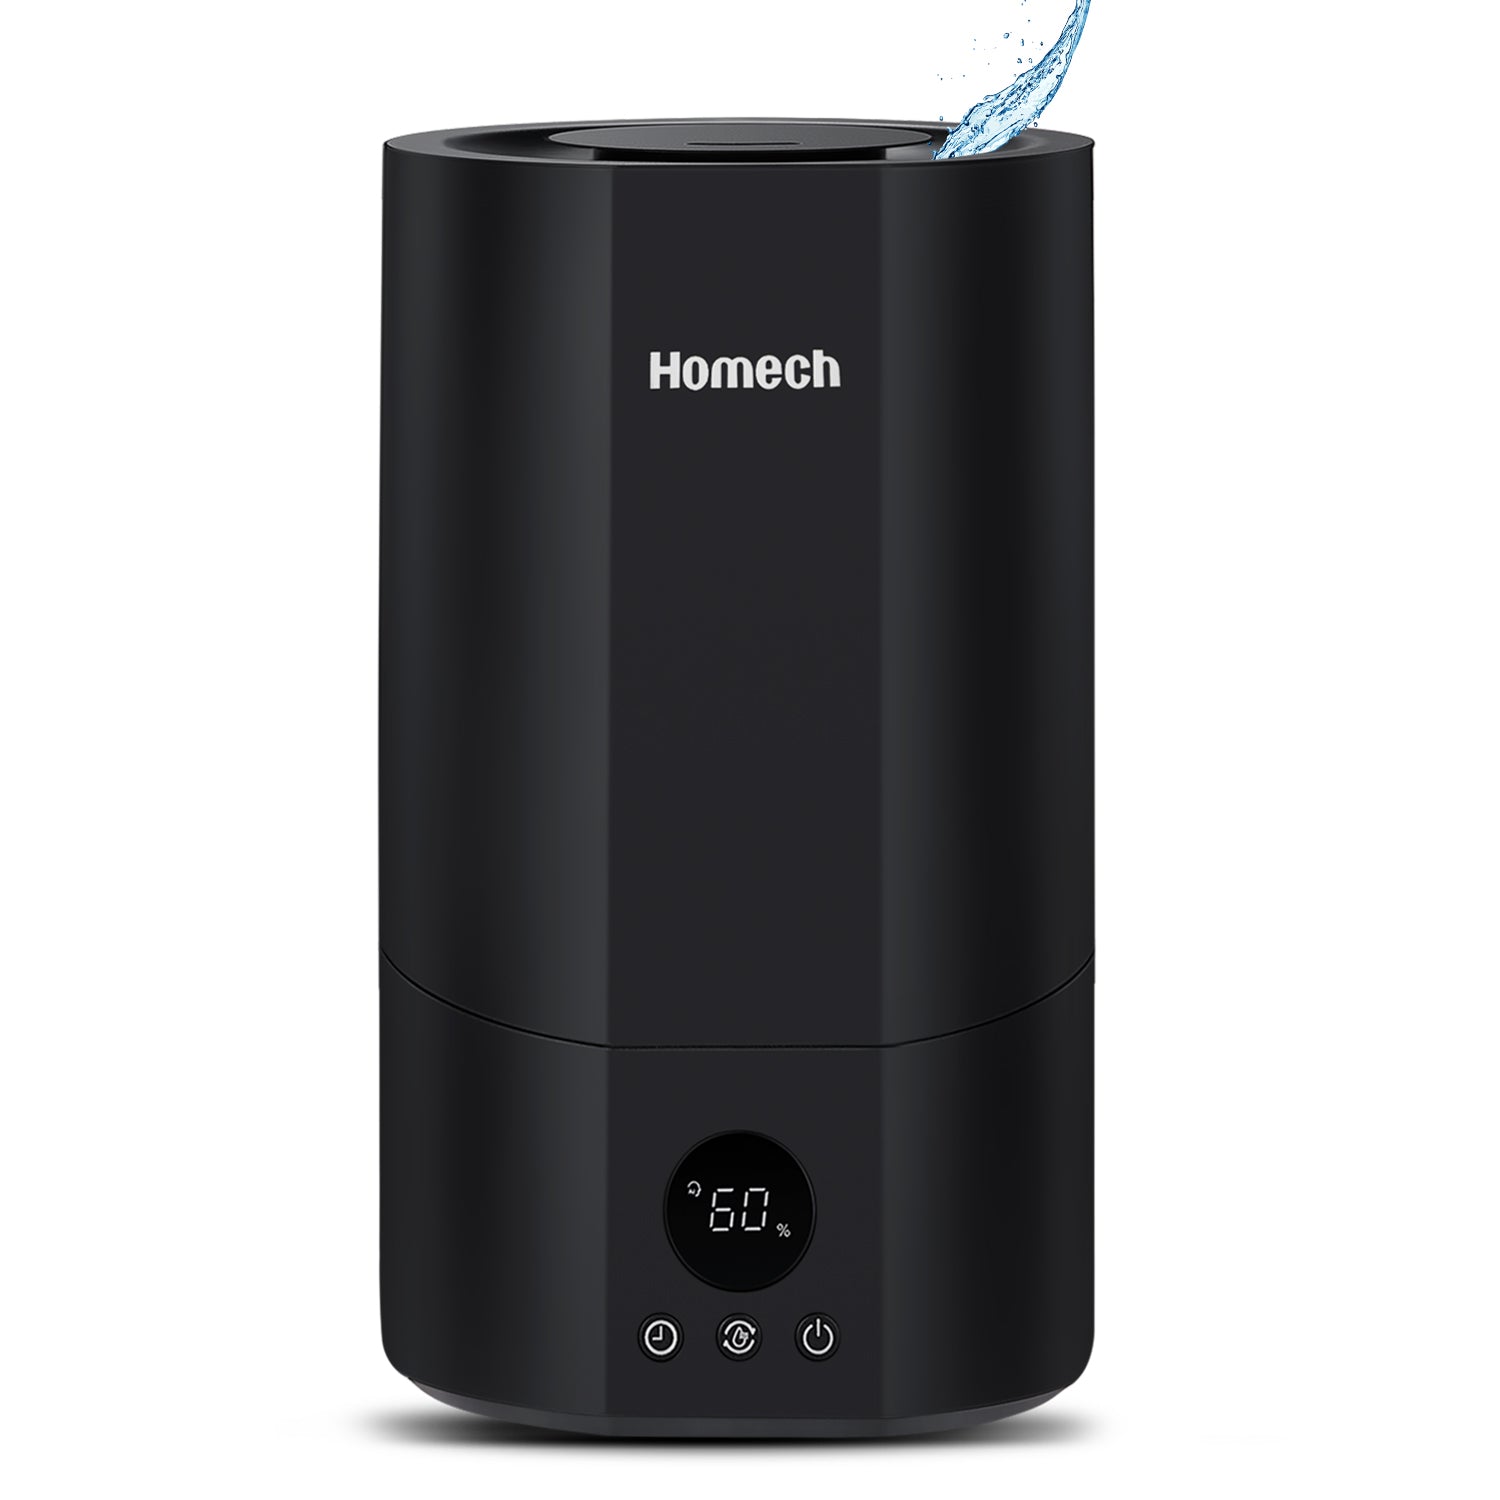 Homech 4L Cool Mist Humidifier 005,Top Fill Quiet Ultrasonic Humidifier with Auto Mode